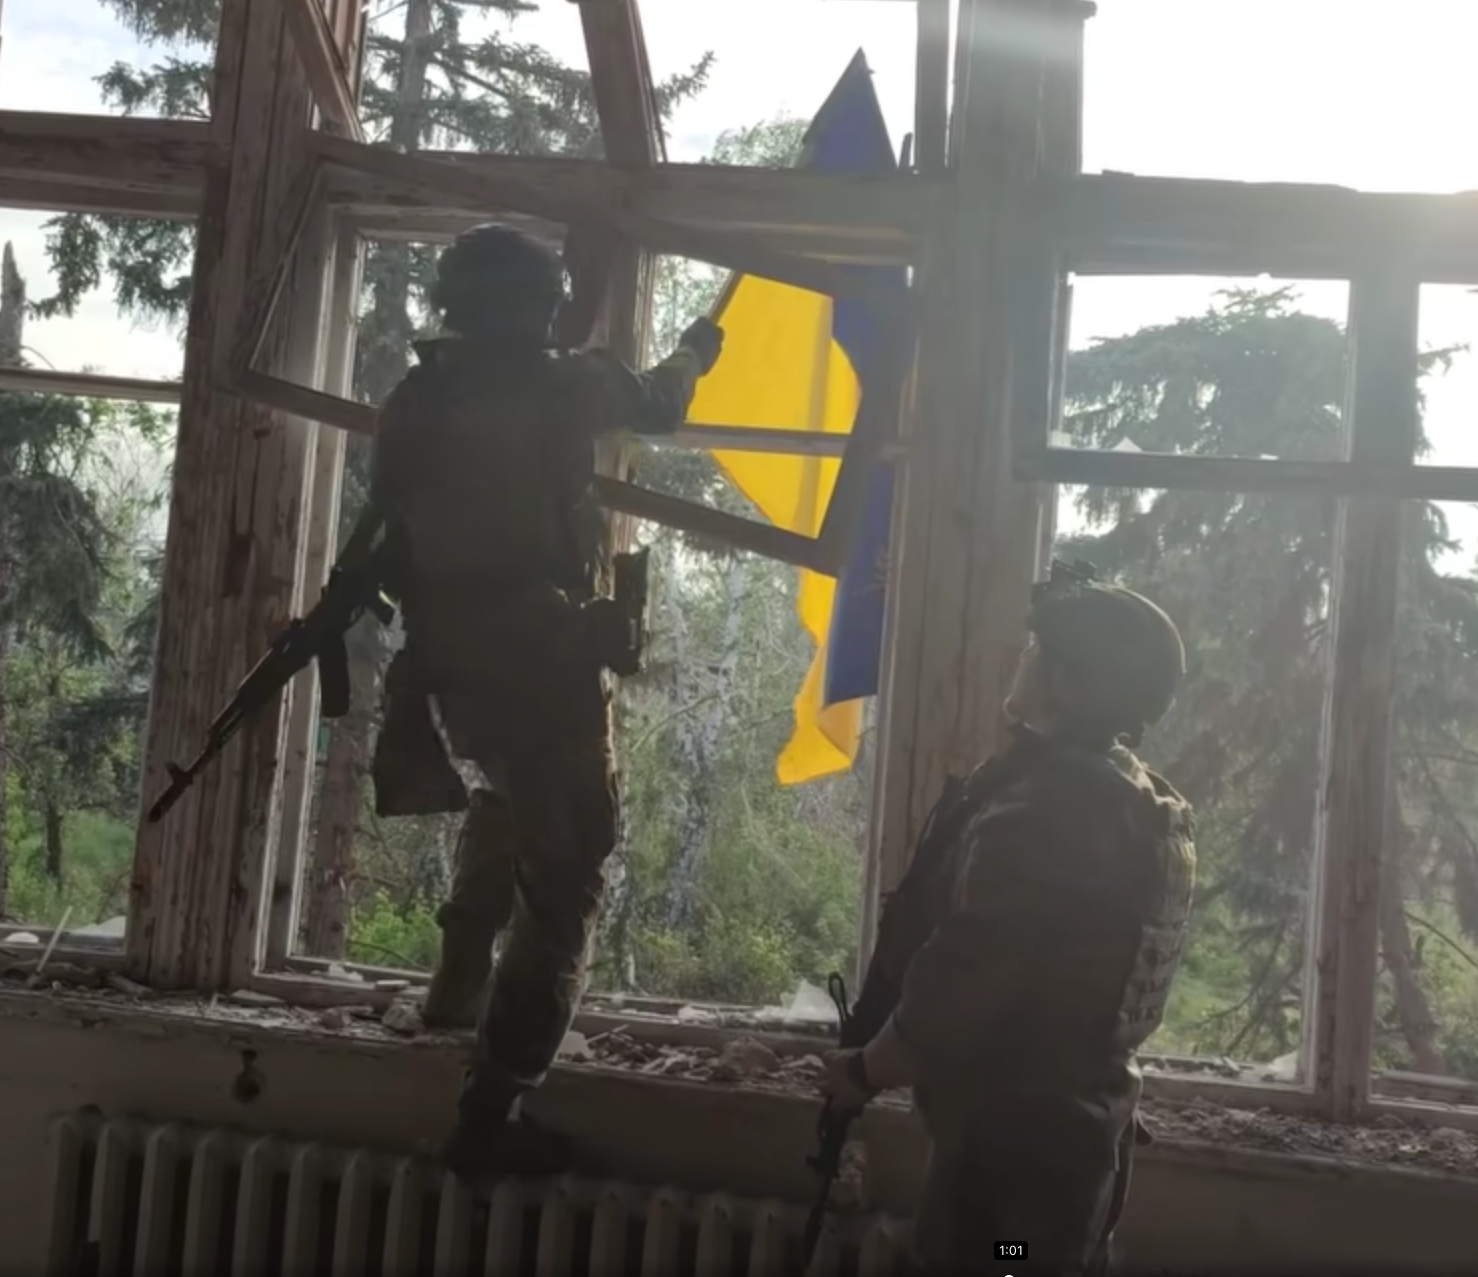 Ukraine celebrated its “first partial victory” in the counterattack.